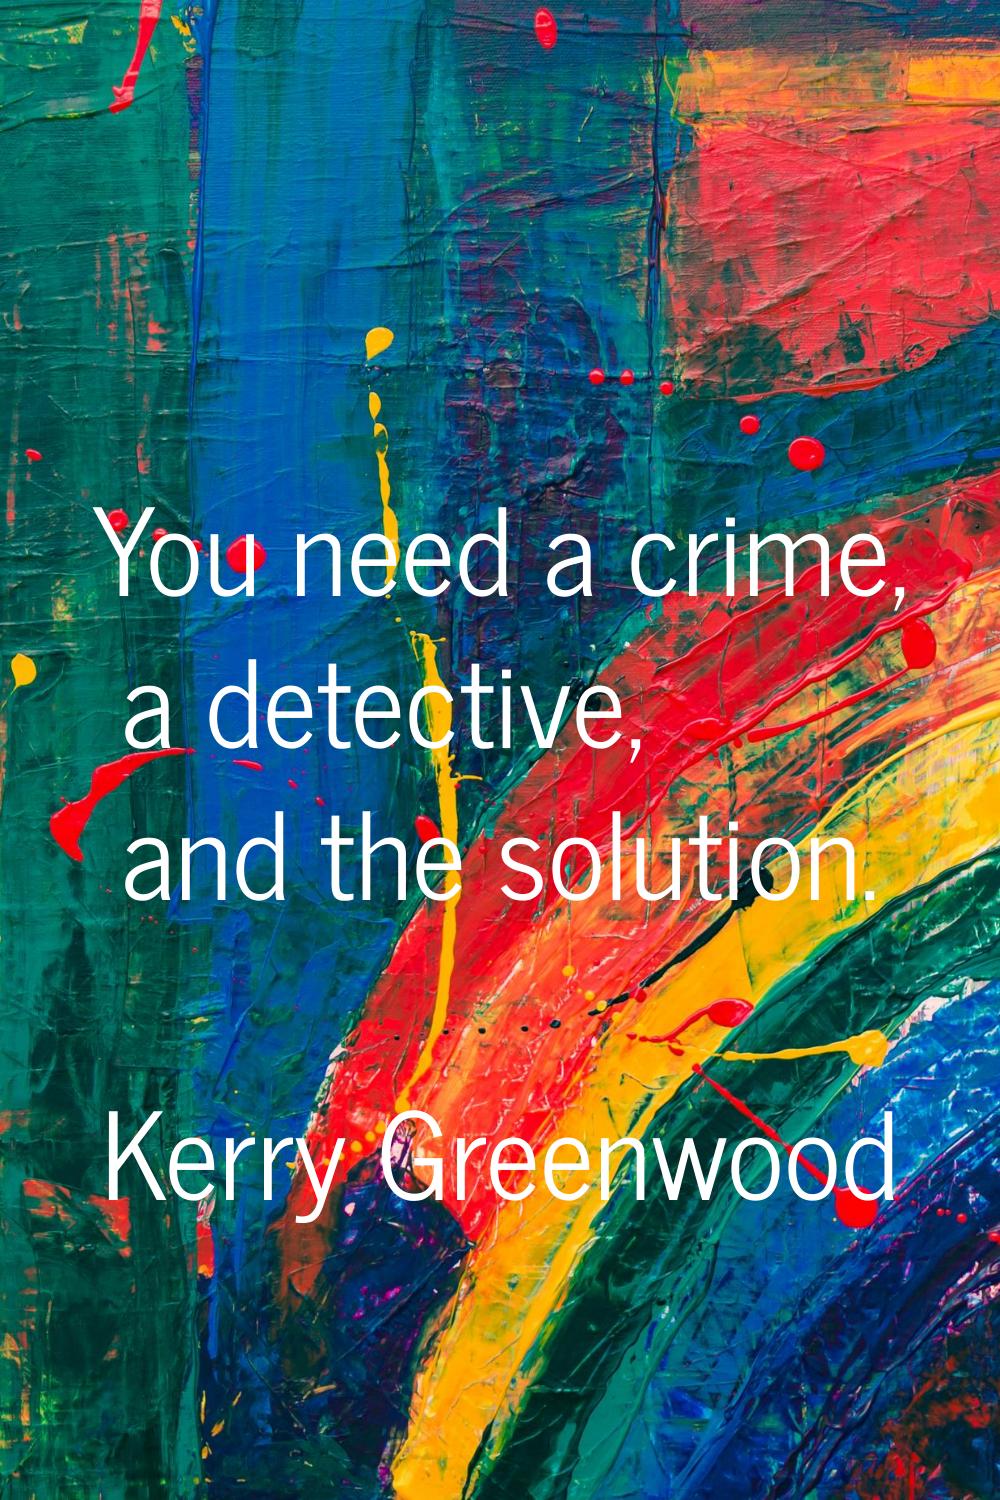 You need a crime, a detective, and the solution.